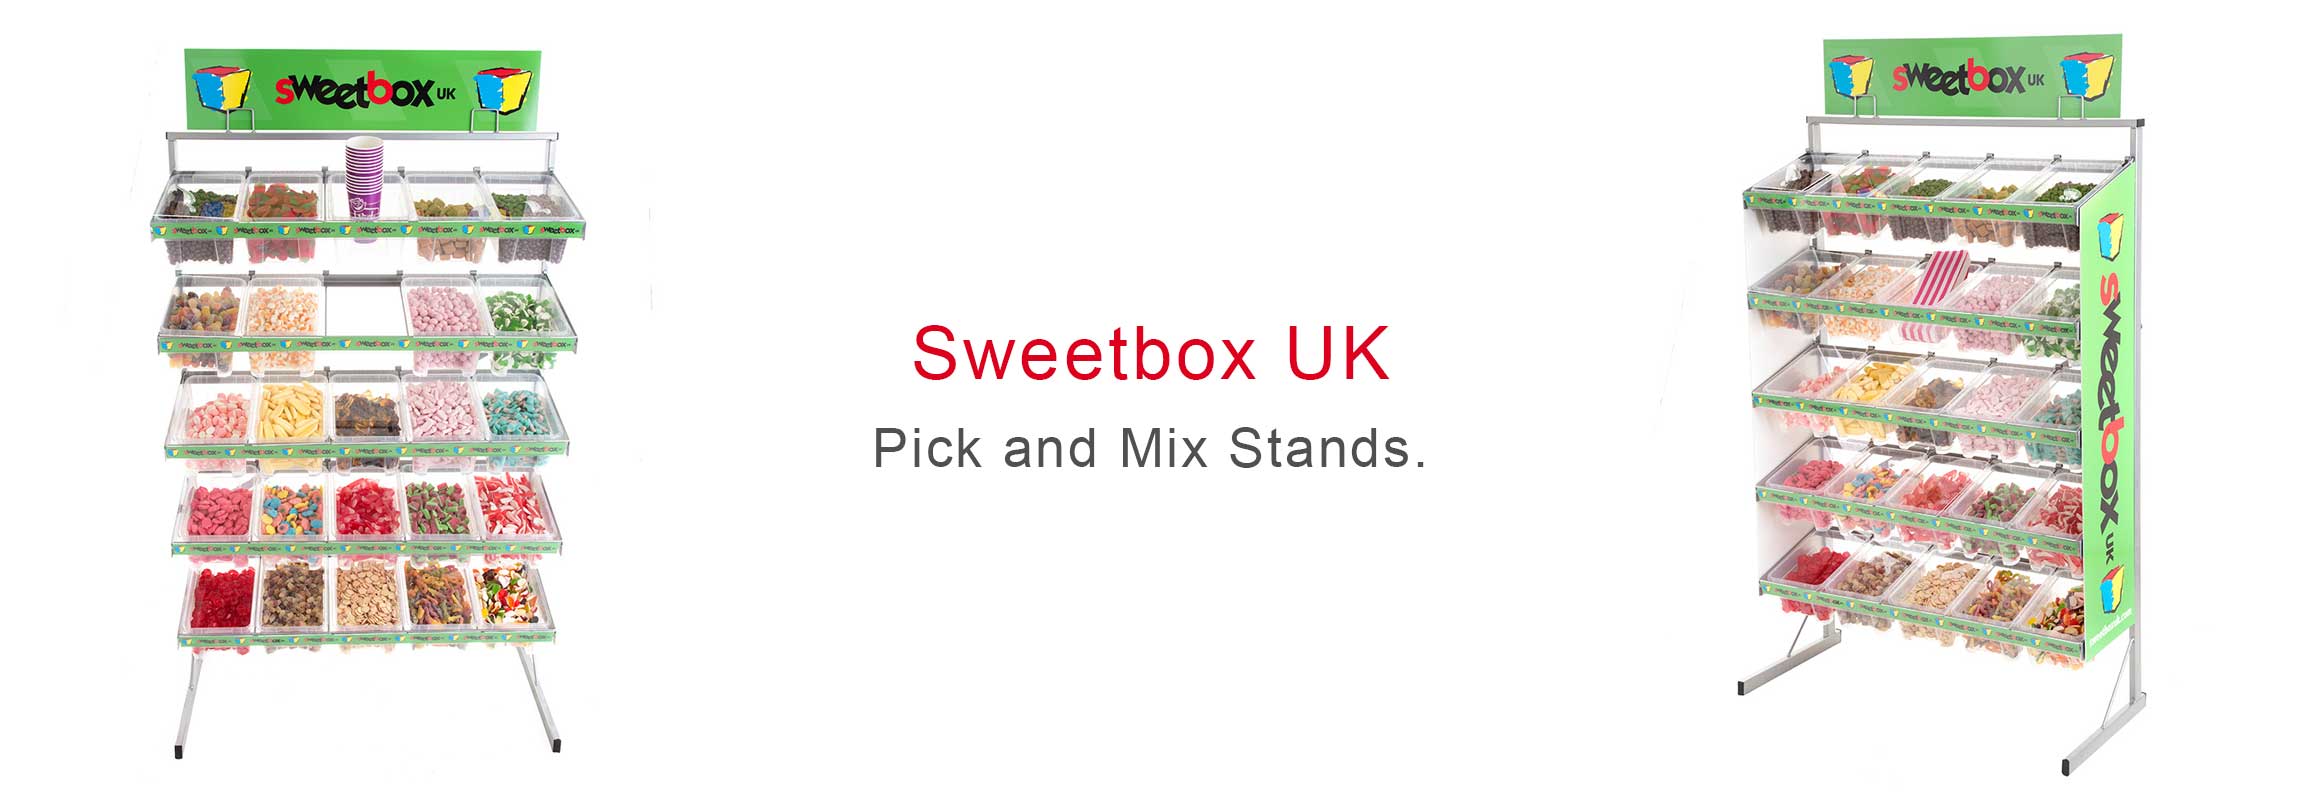 Pick n Mix stand - £65.00 when filled with sweets, £40.00 without